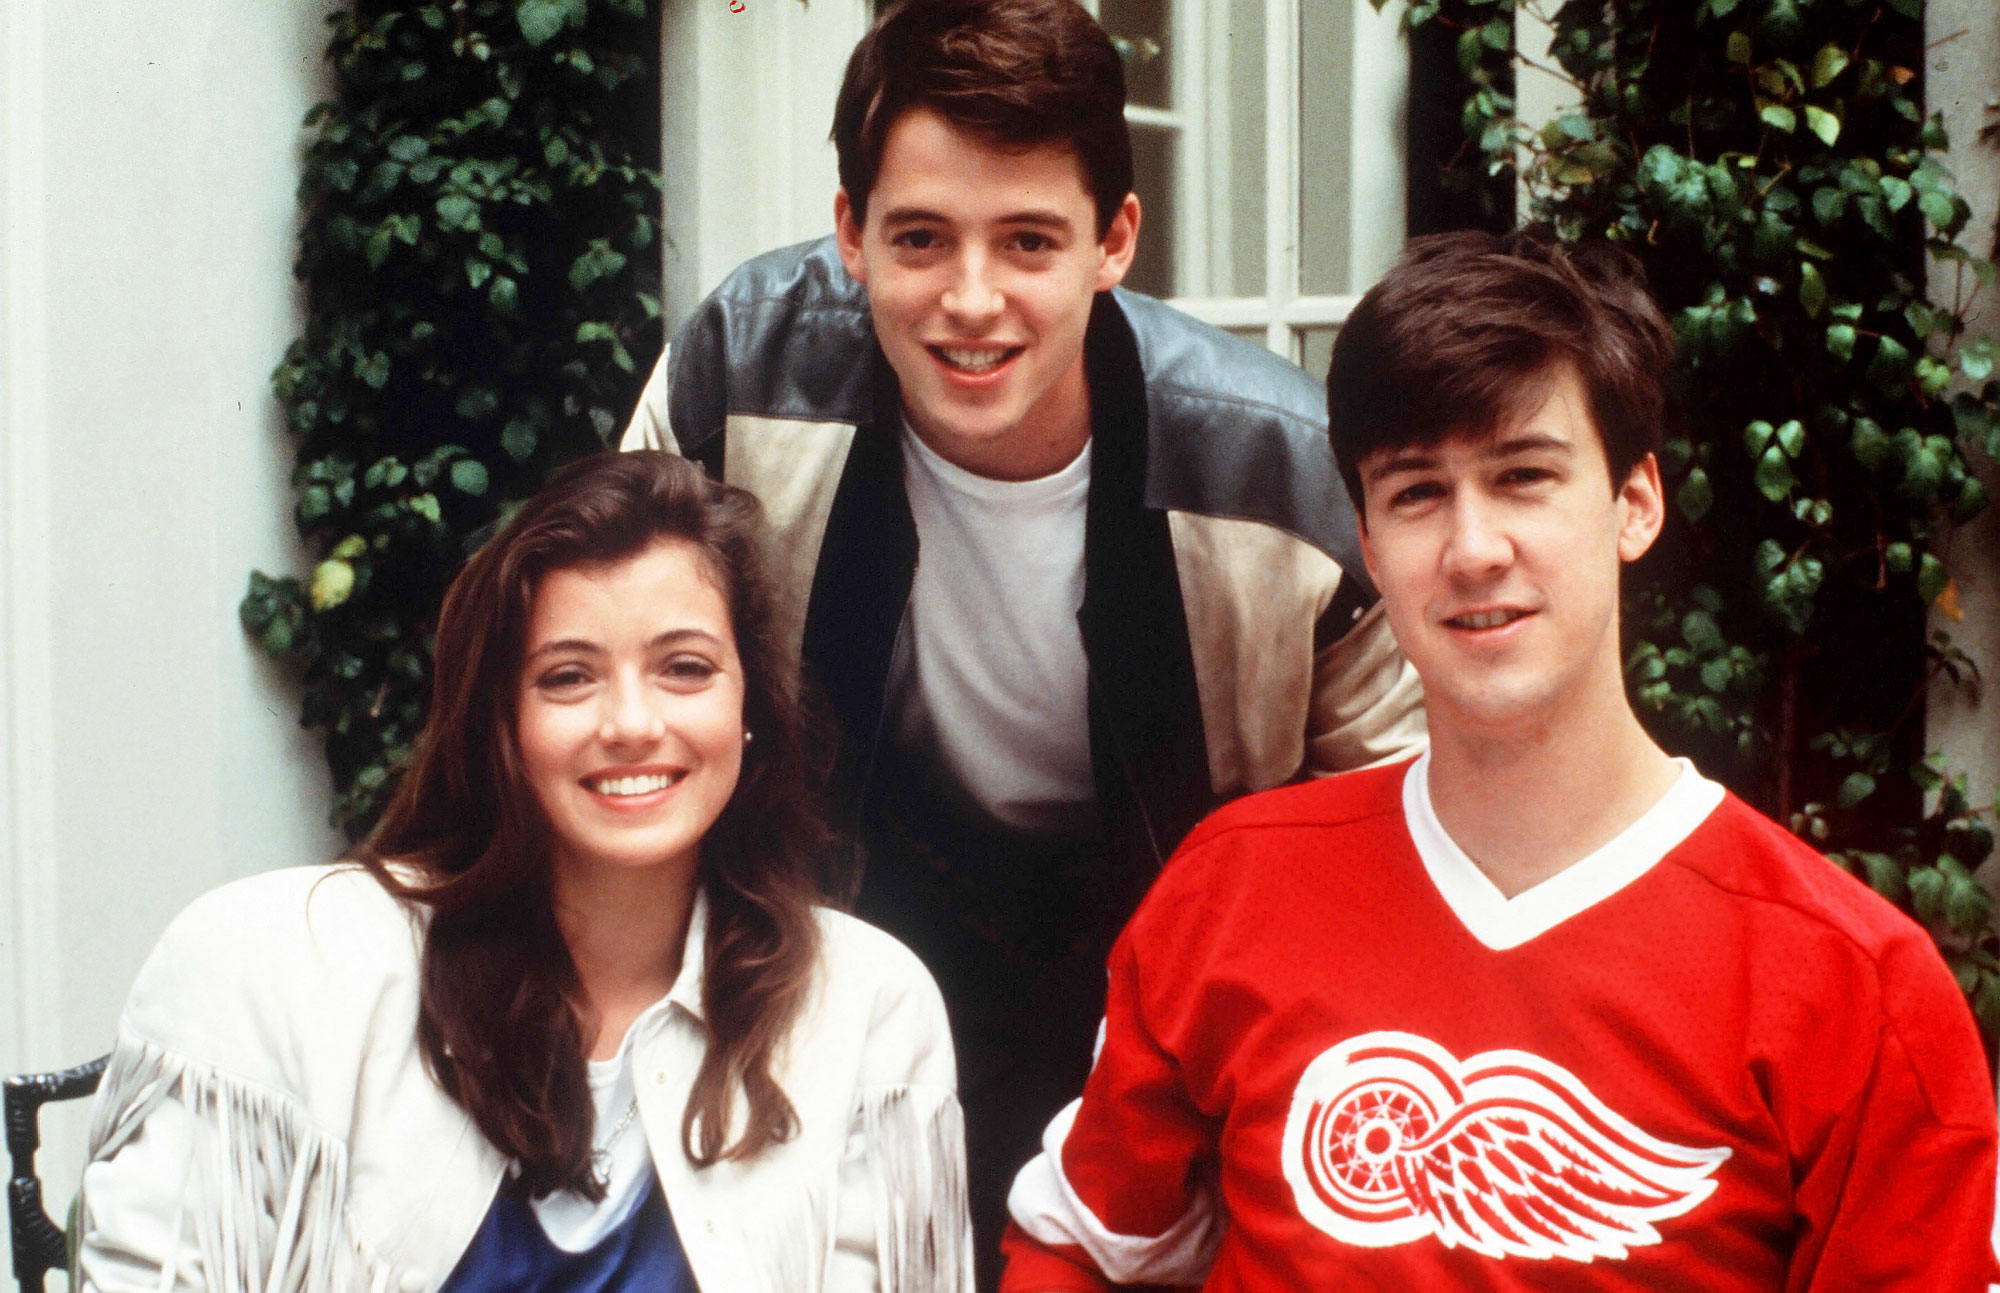 Alyssa Hart Brother Porn - Ferris Bueller's Day Off' Cast: Where Are They Now?